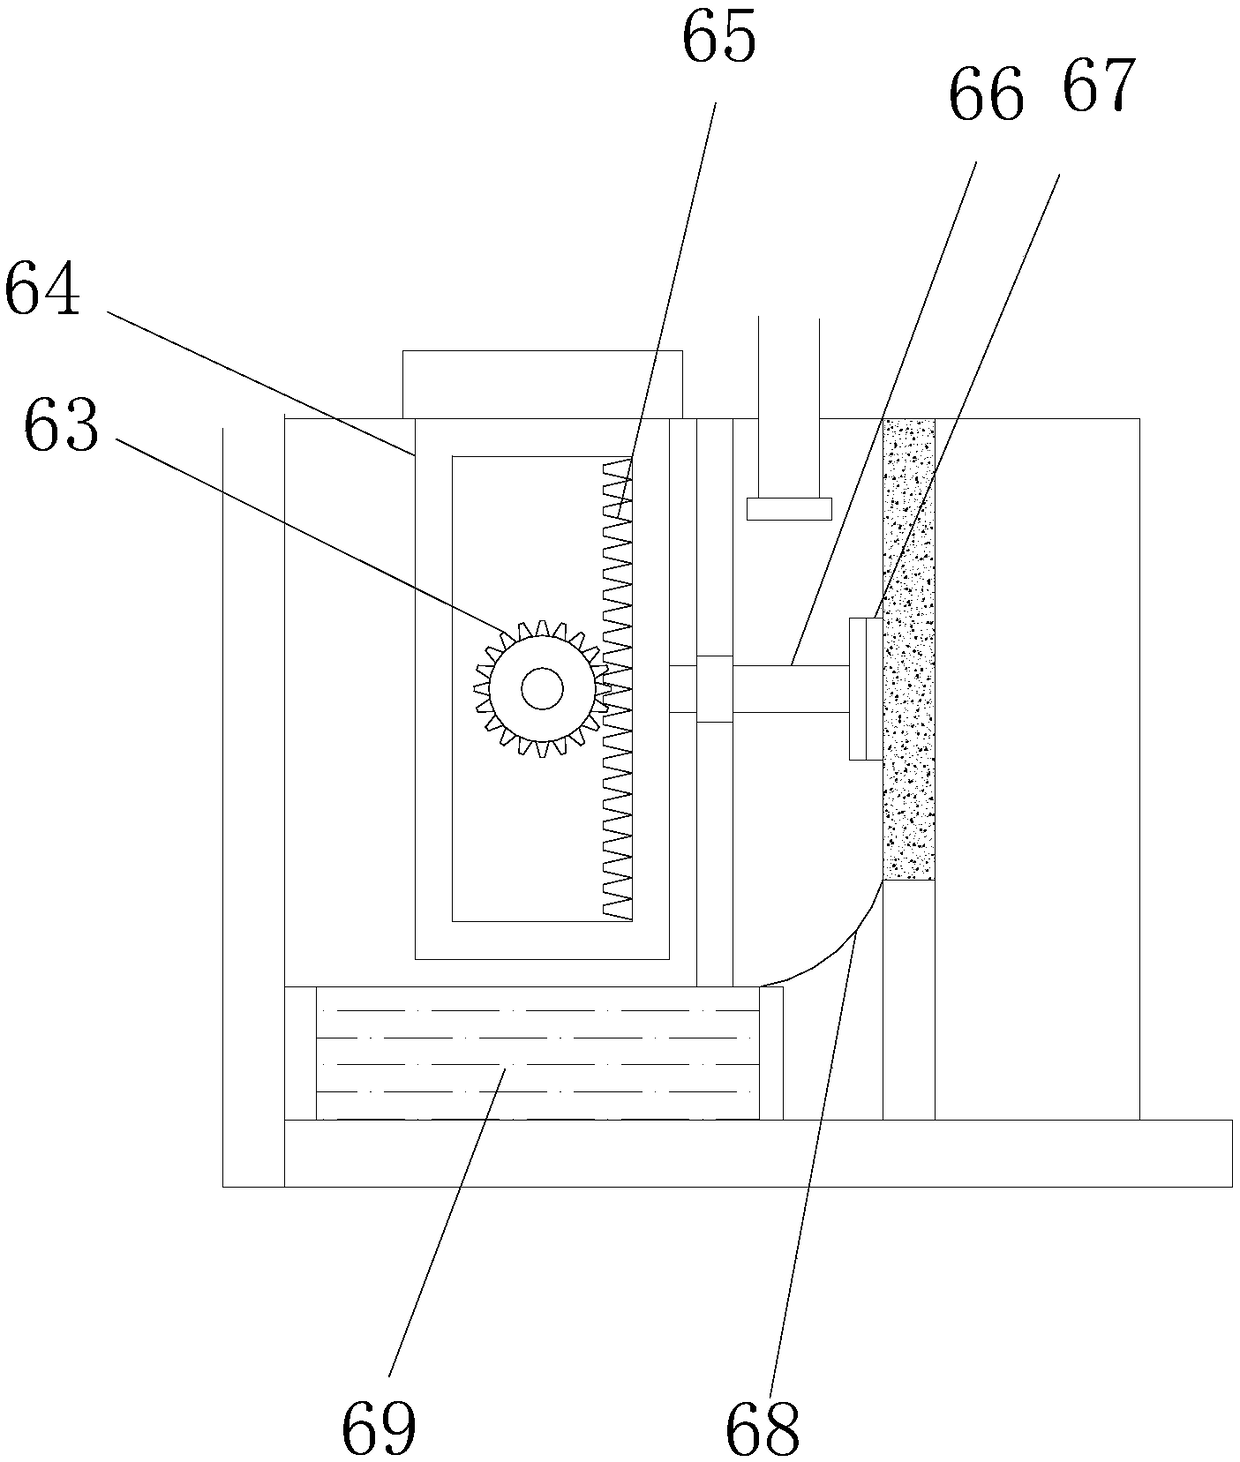 Flue gas treatment device for processing of ores